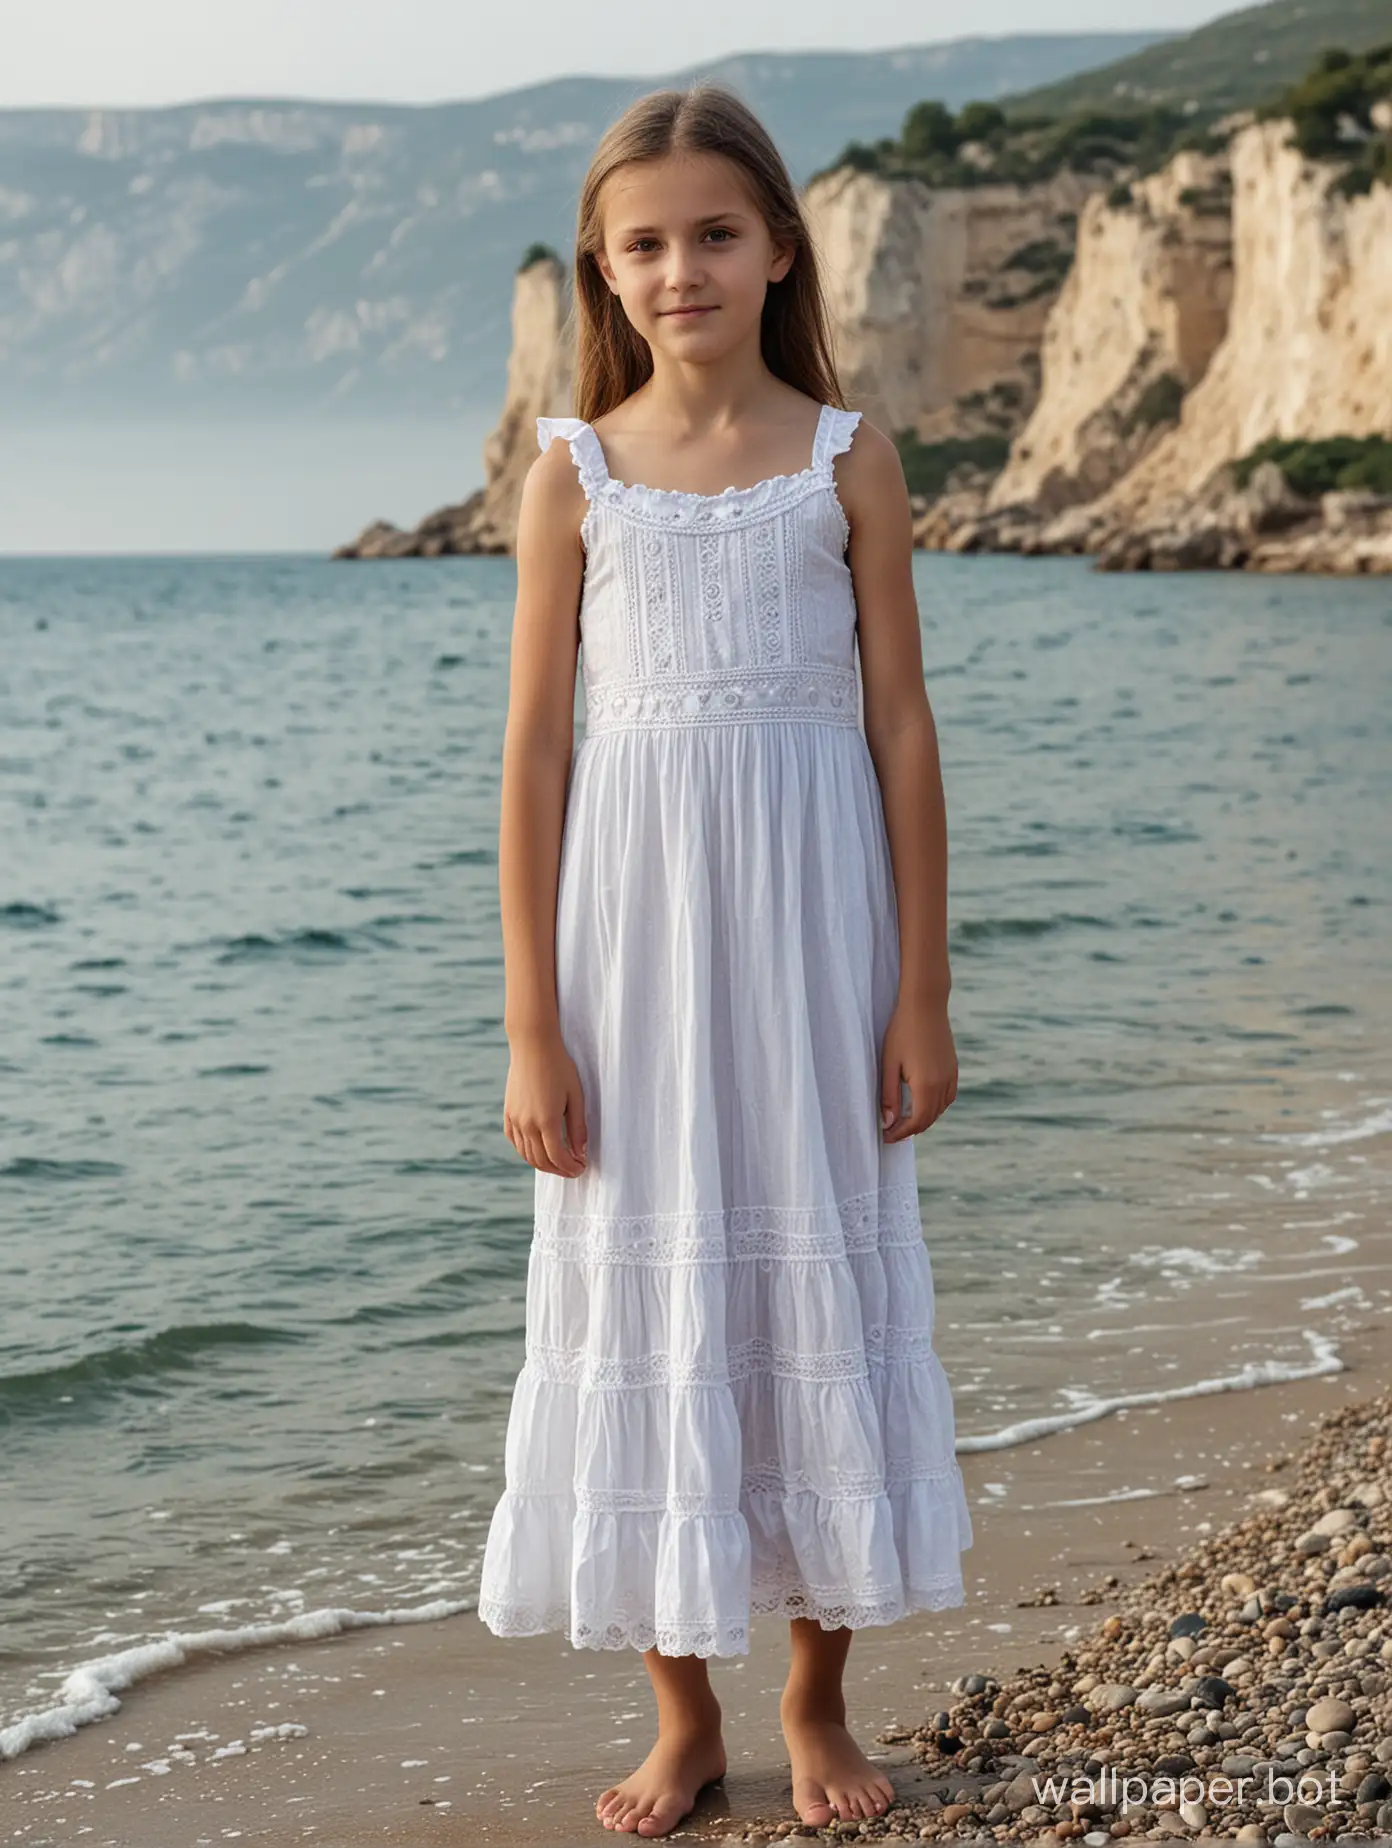 Seaside-Portrait-Captivating-Pose-of-a-10YearOld-Girl-in-a-Dress